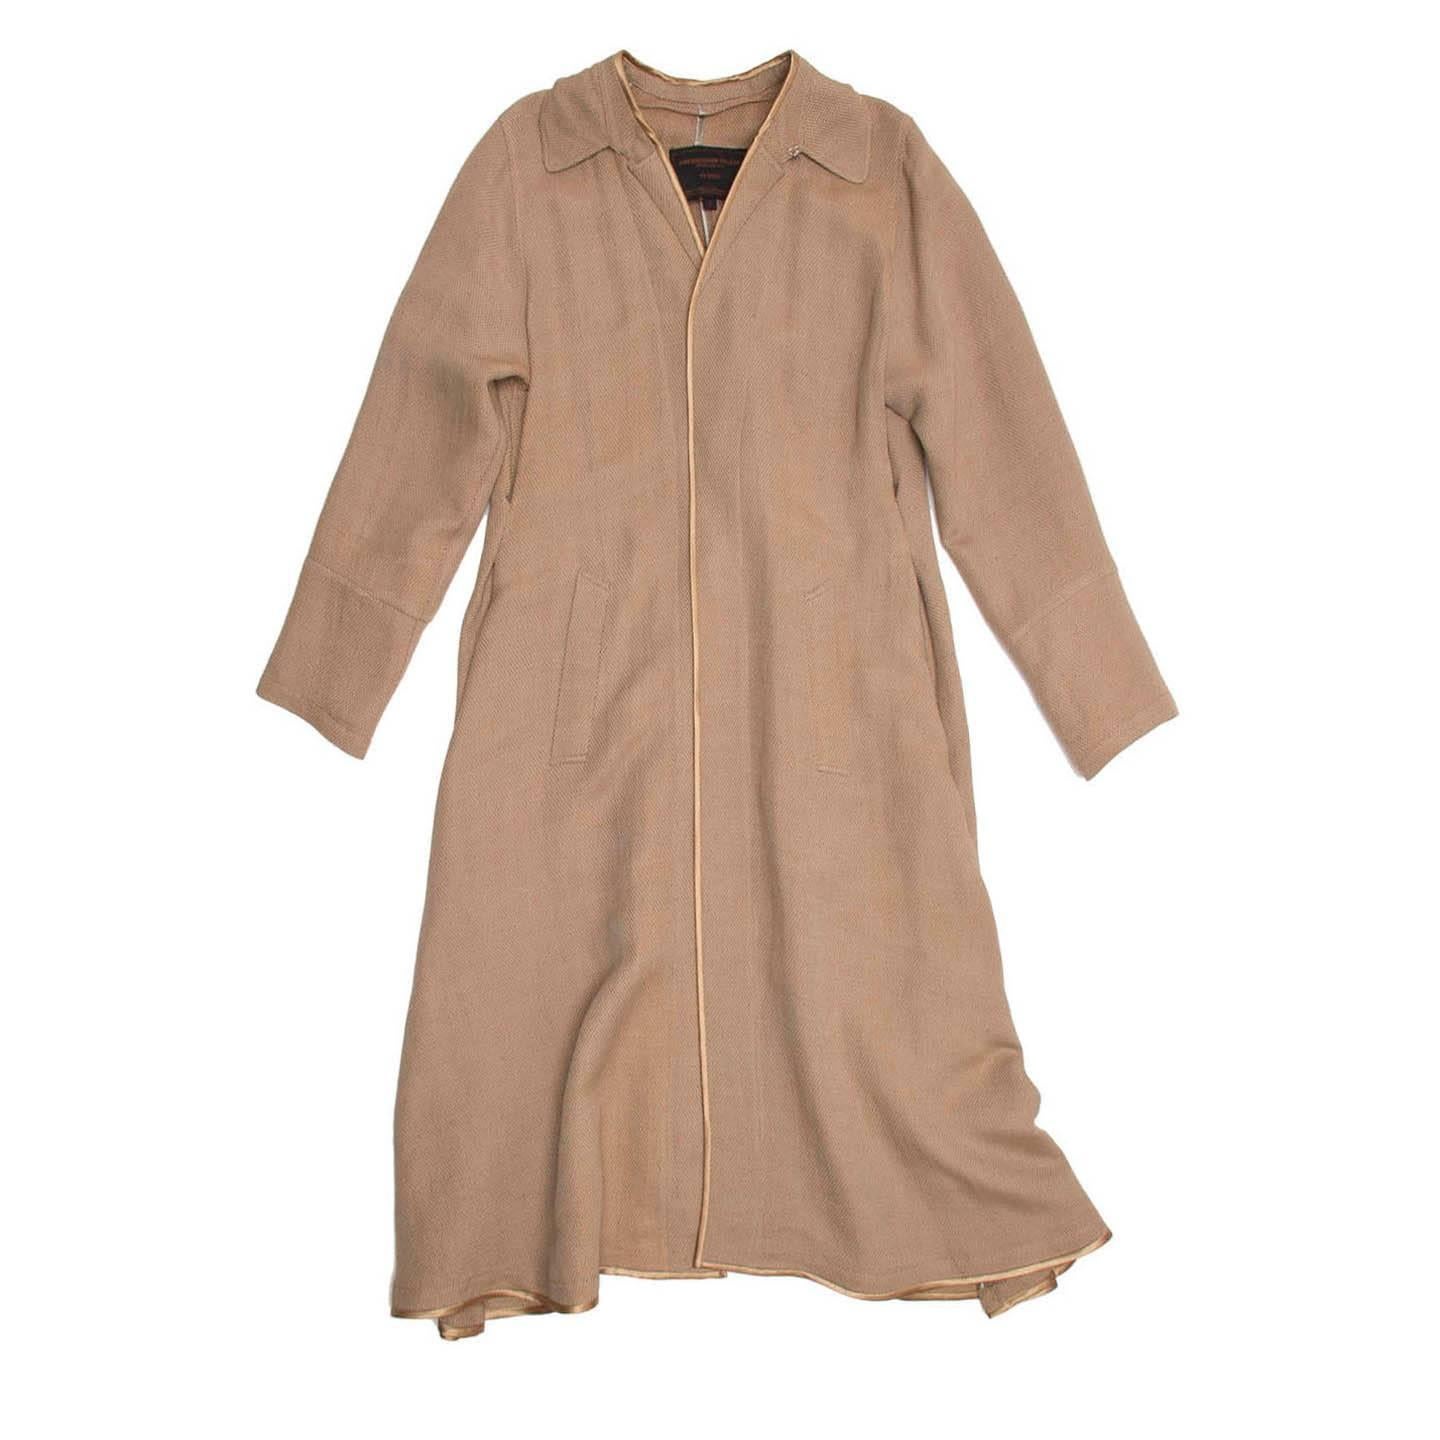 Bronze and beige linen/rayon/cotton blend woven duster style coat with bronze satin binding to cover and embellish front, neckline and hem edges. This piece is characterized by many beautiful and unique details: the collar is folded, stitched down